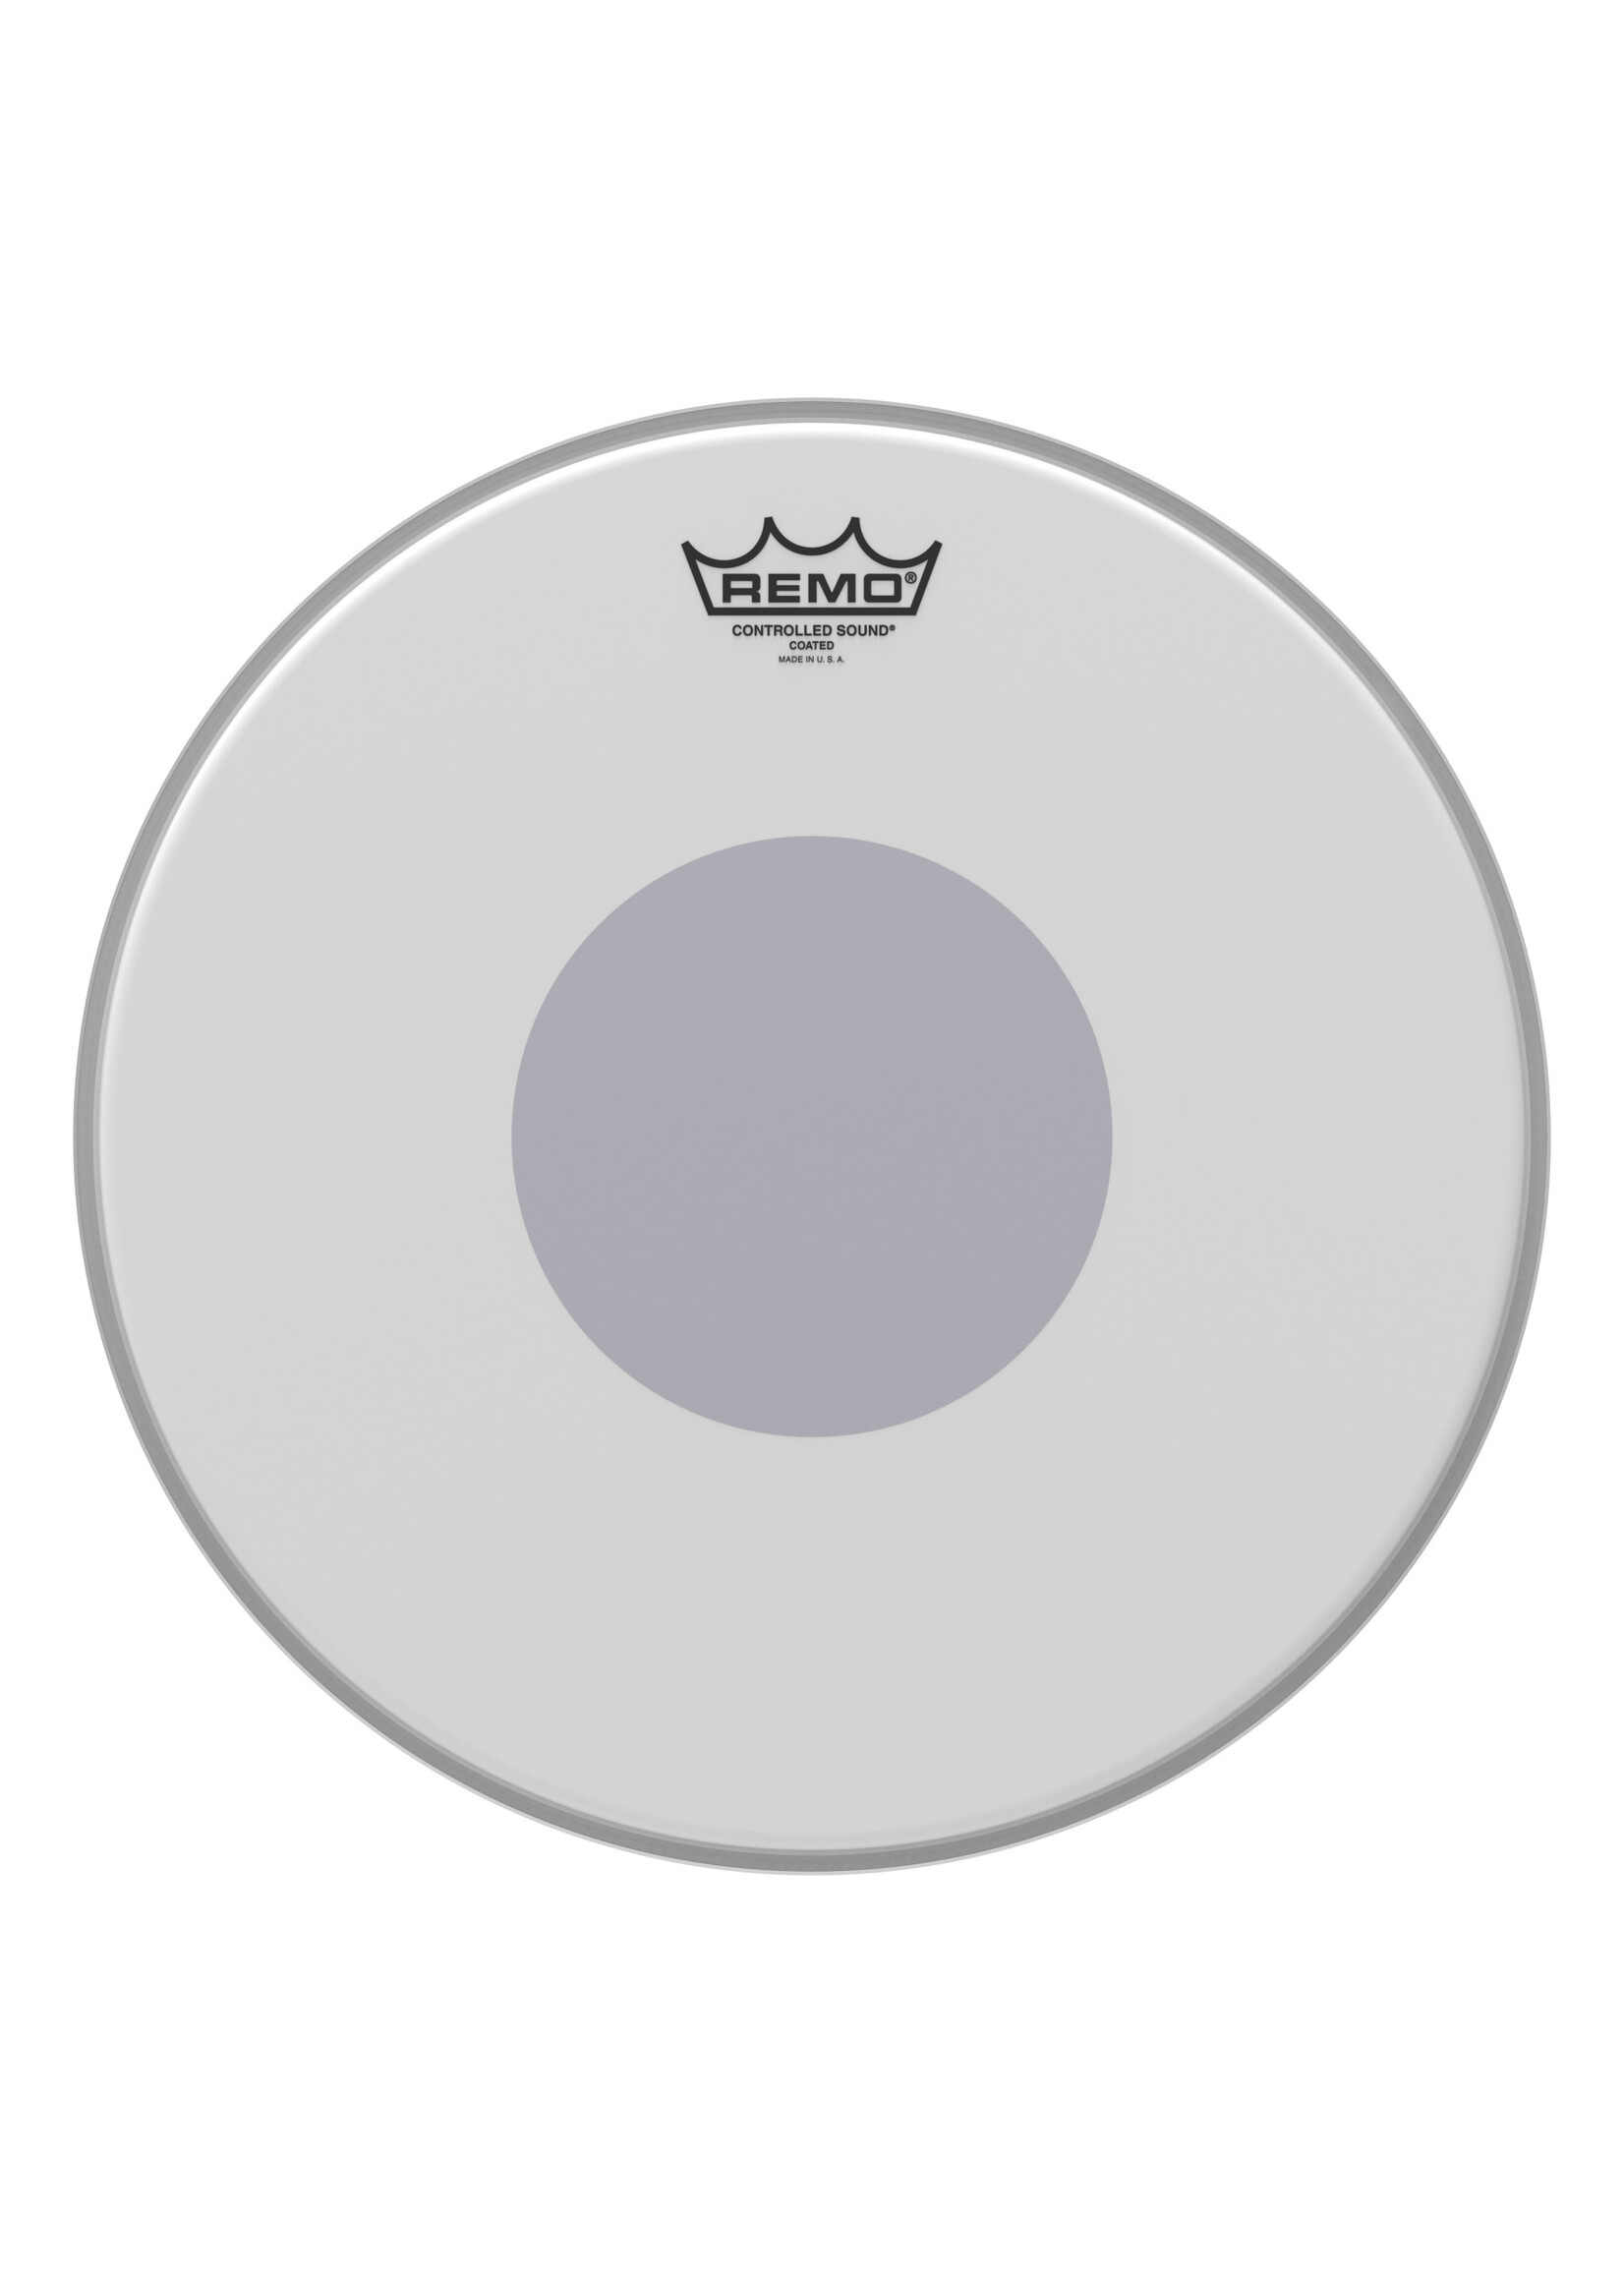 Remo Remo 14" Controlled Sound Drumhead Coated